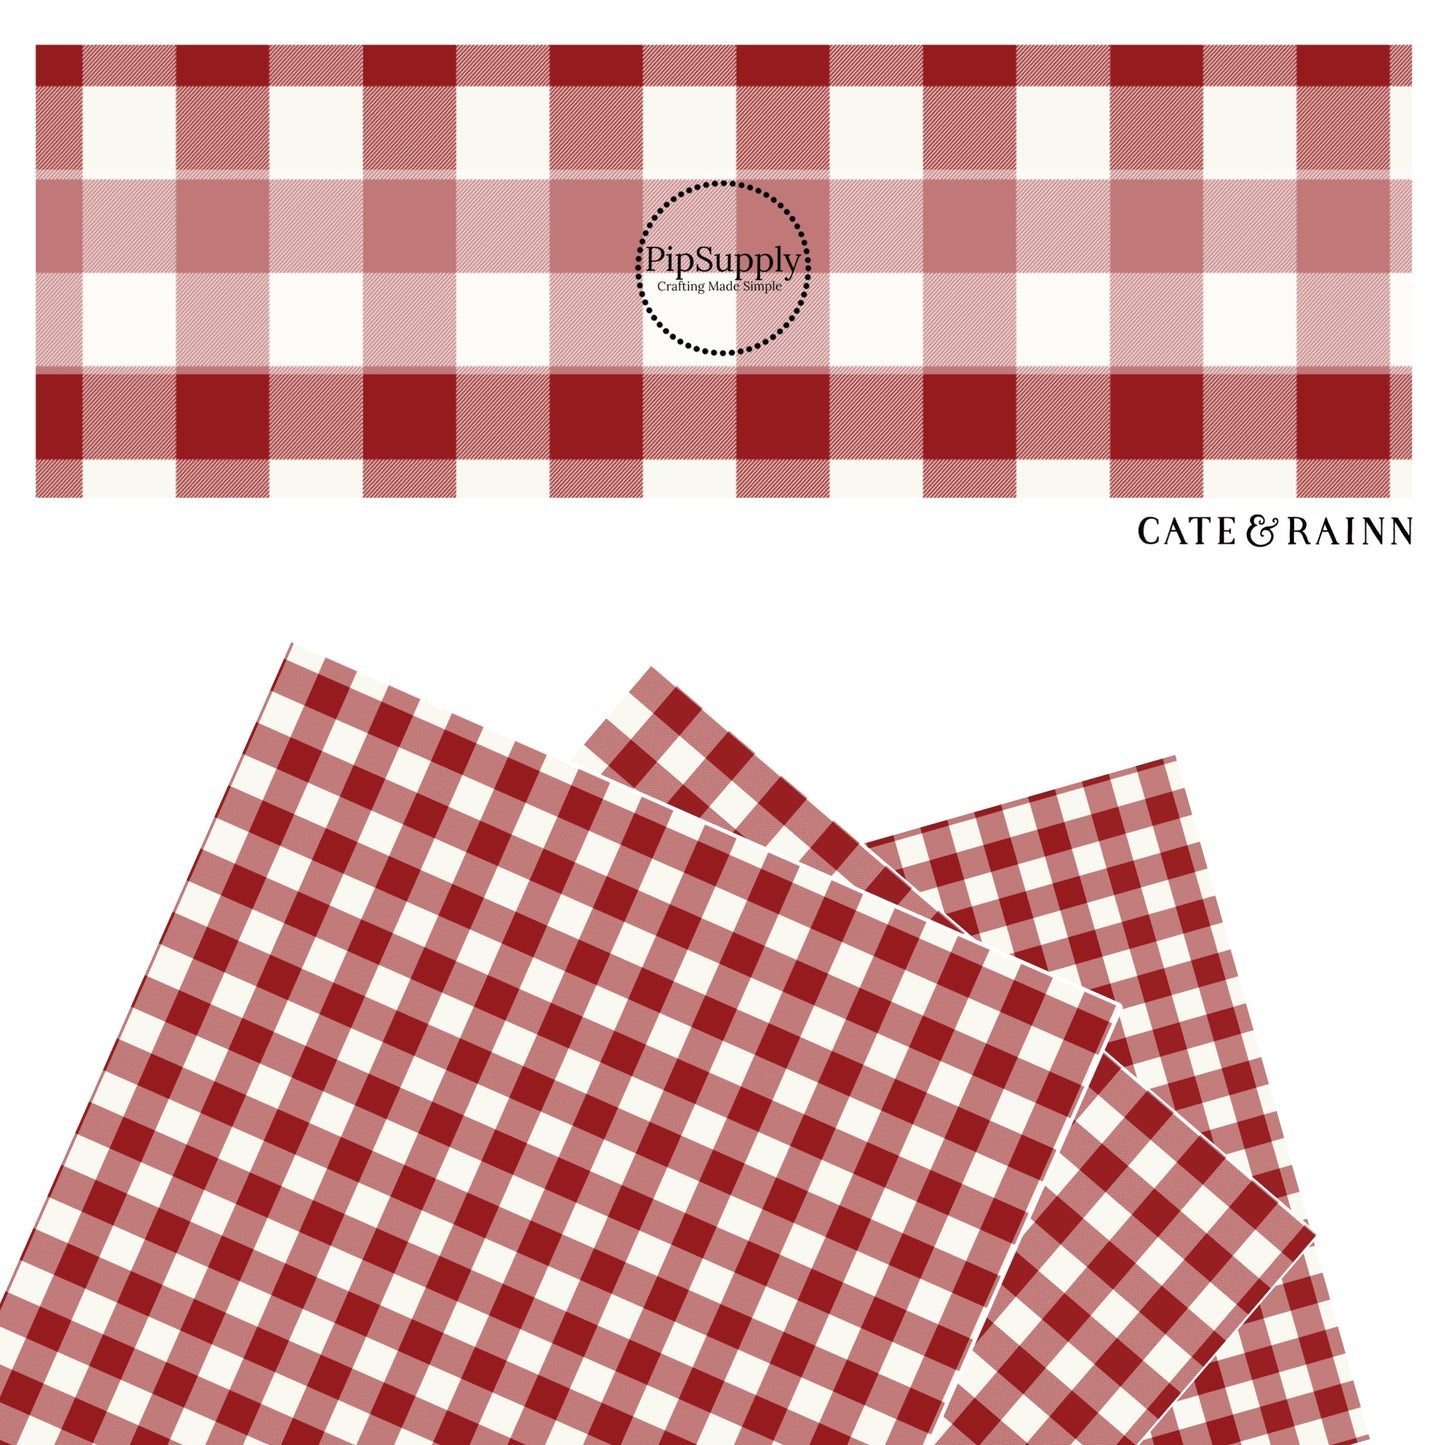 Striped red amd white gingham faux leather sheets